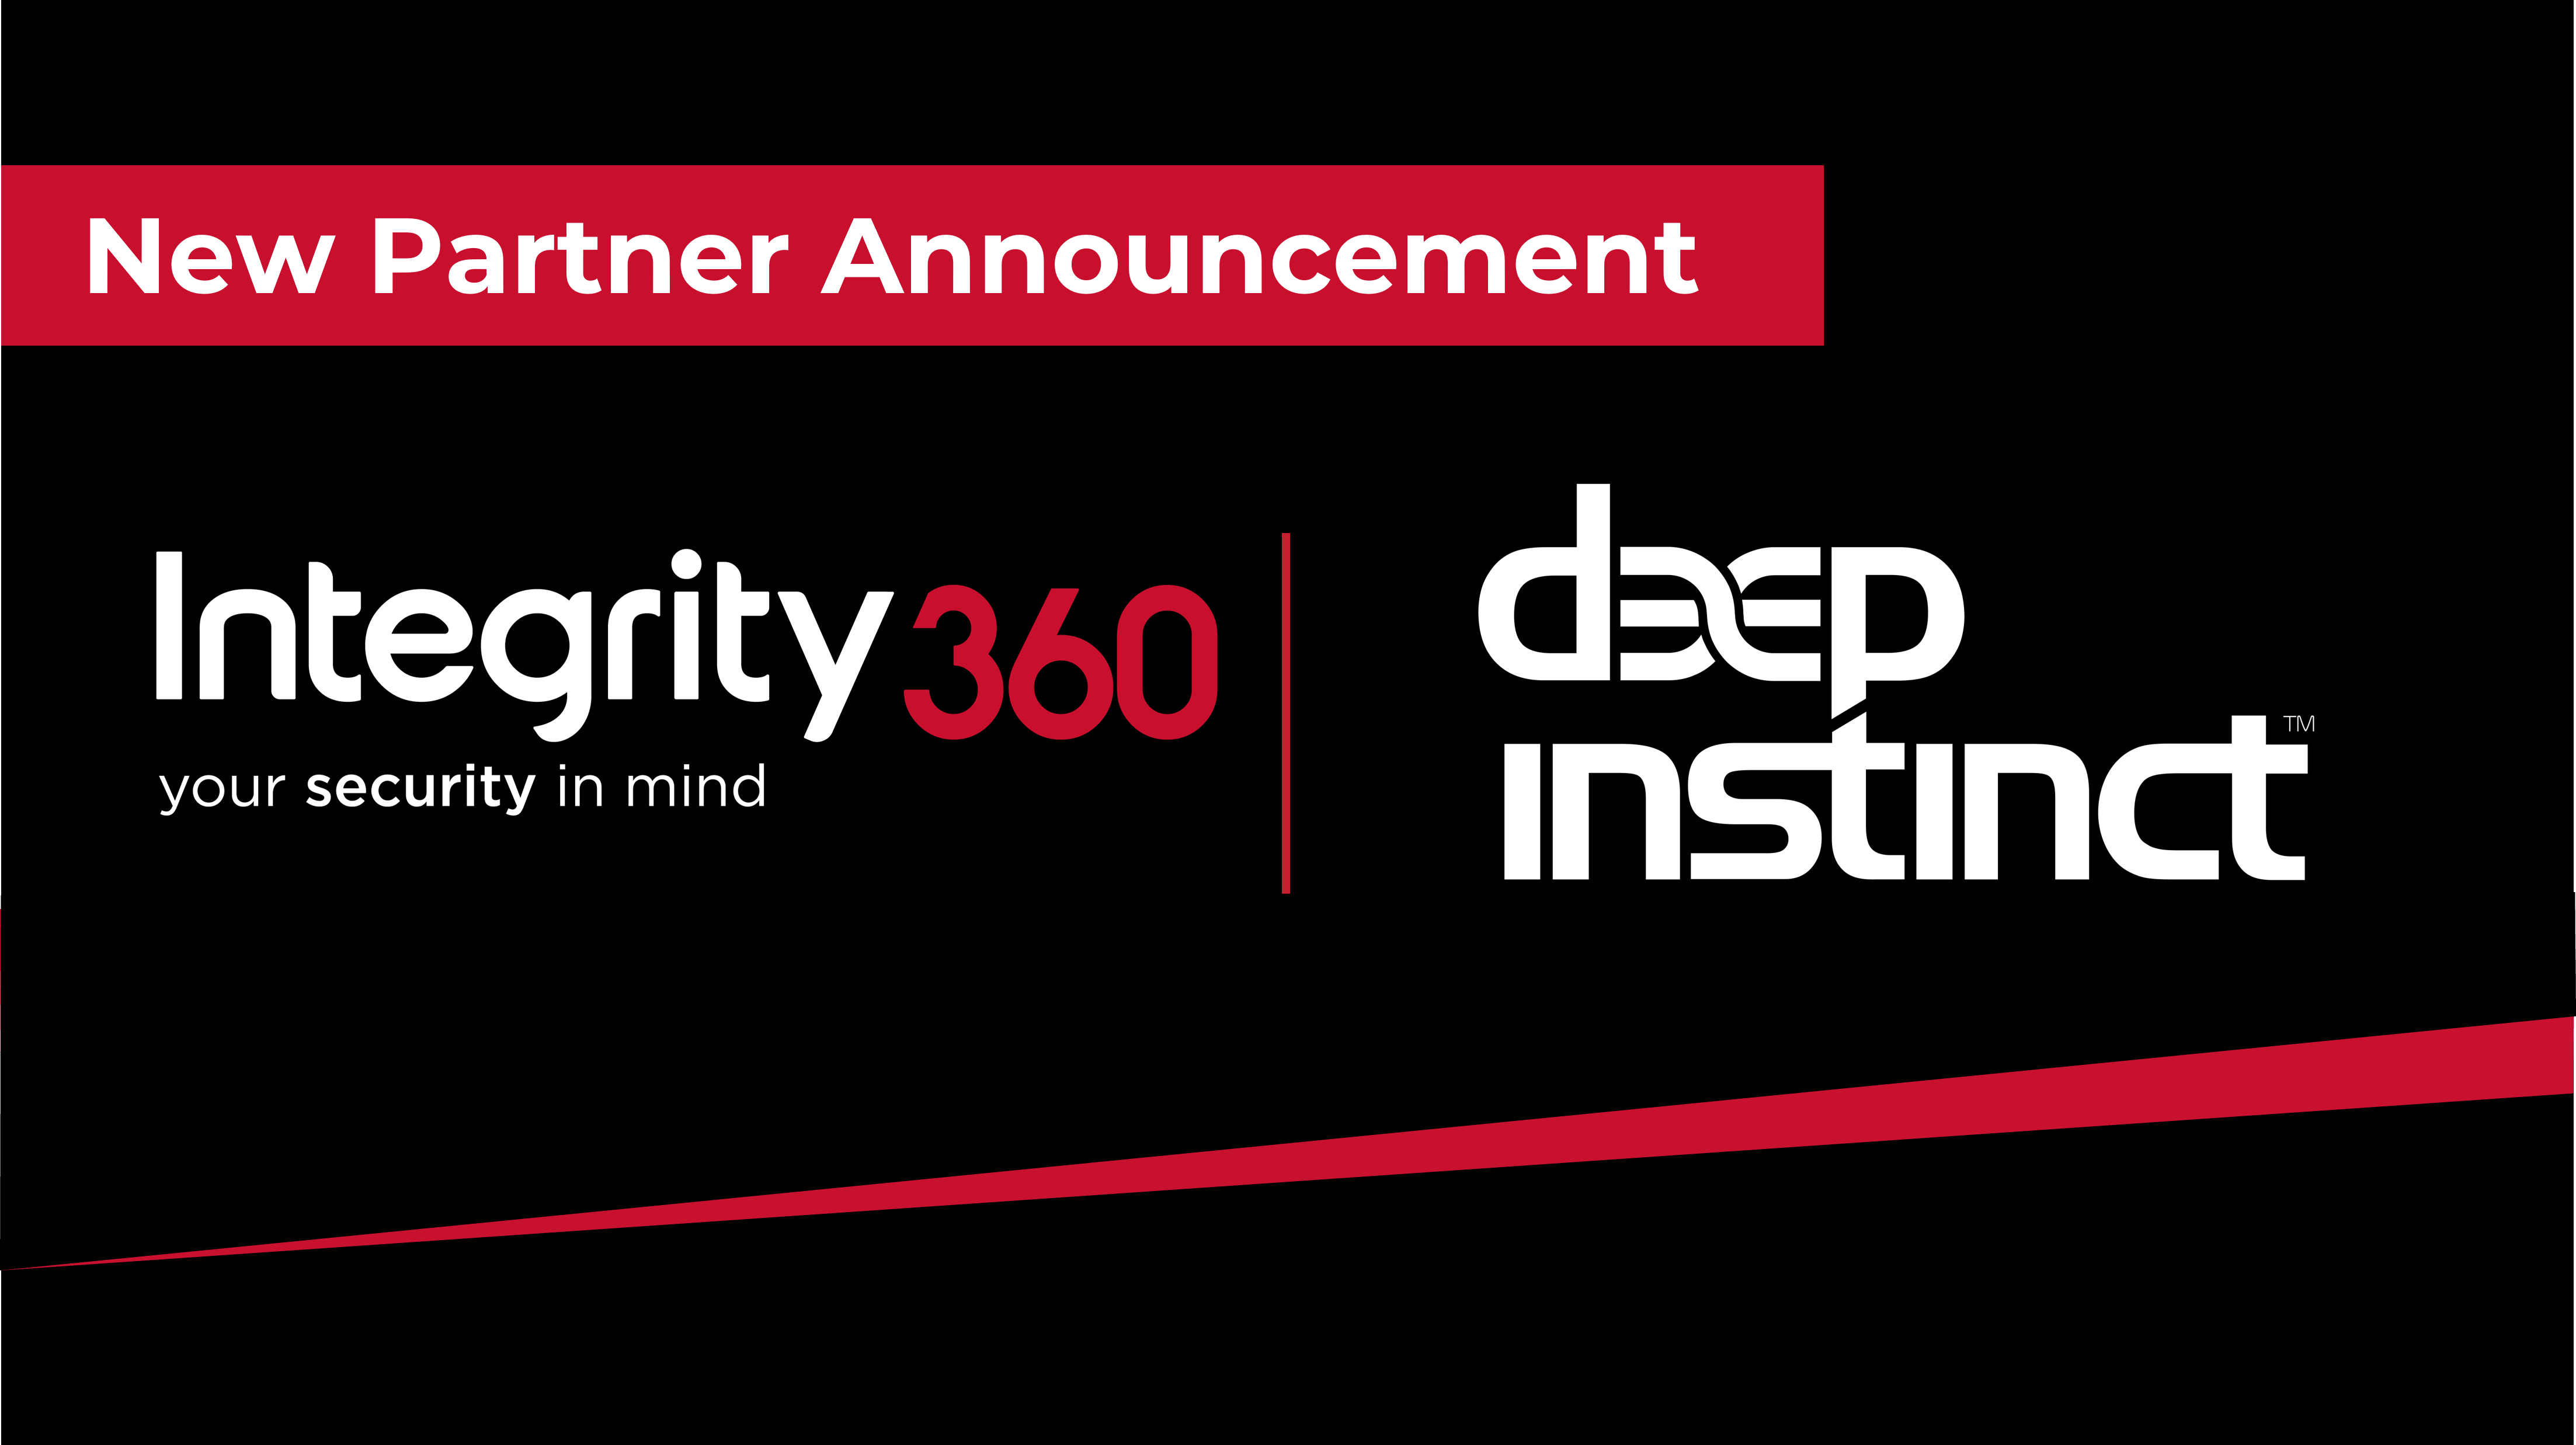 Deep Instinct partners with Integrity360 to deliver end-to-end deep learning cyber security to UK enterprises